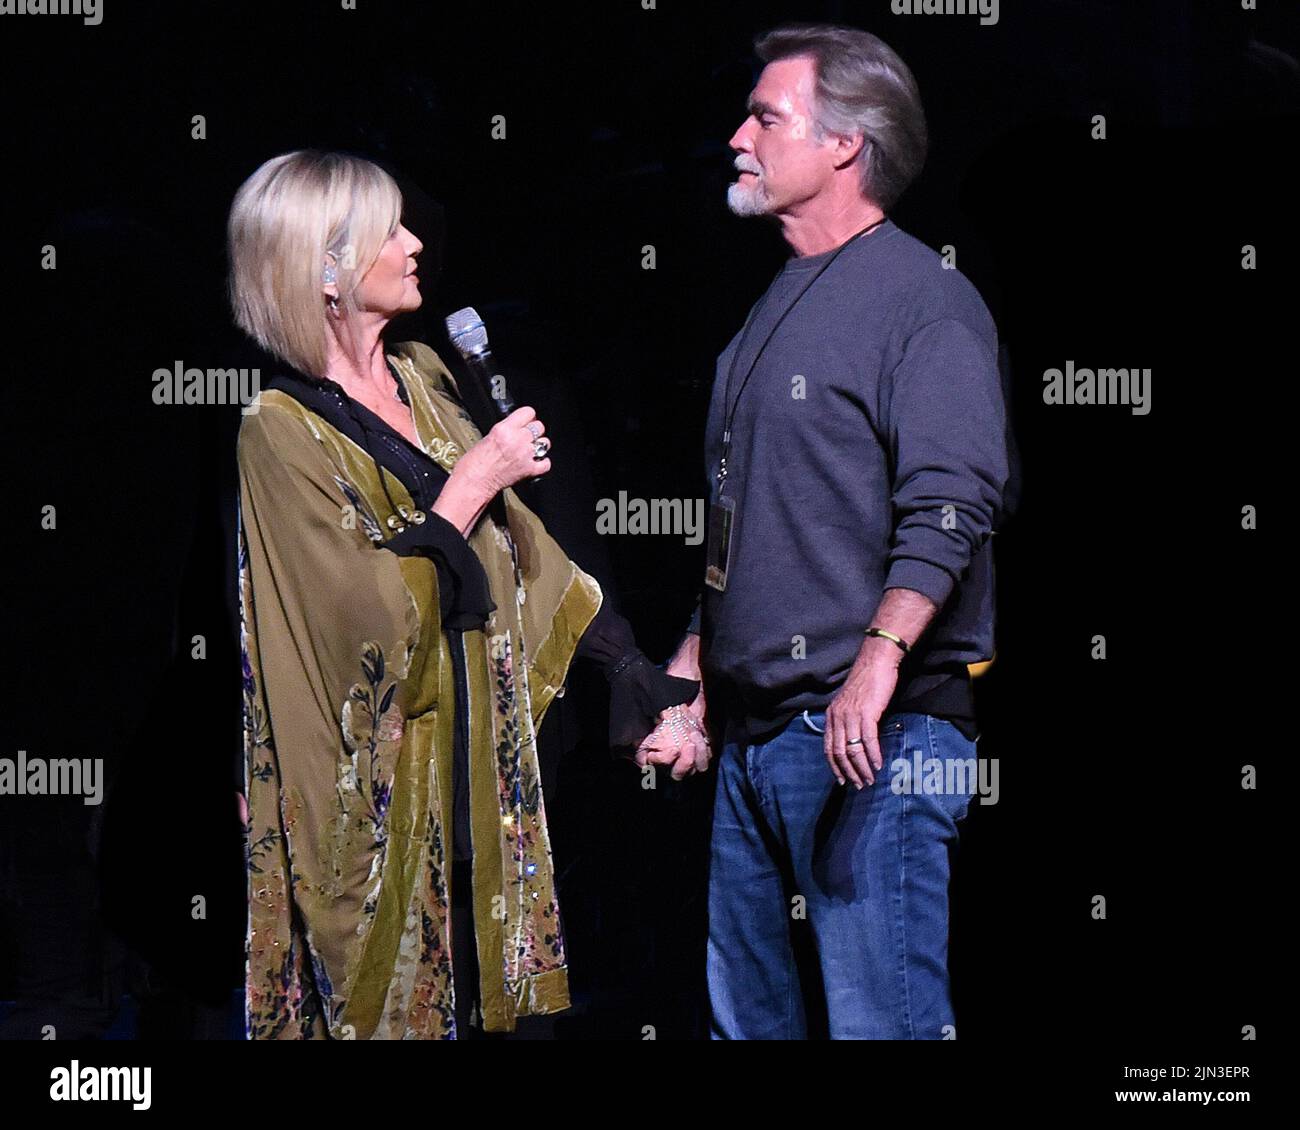 FILE PICS: Olivia Newton-John 1948-2022. Atlanta, GA, USA. 9th Apr, 2017. Olivia Newton-John surprises her husband John Easterling by singing a parody of “The Girl From Ipanema” as “The Boy From North Carolina” (in his honor) which she had sung for him at their wedding. The surprise performance took place at Cobb Energy Center in Atlanta, Georgia on April 9, 2017. Credit: Chris Mc Kay/Media Punch/Alamy Live News Credit: MediaPunch Inc/Alamy Live News Stock Photo